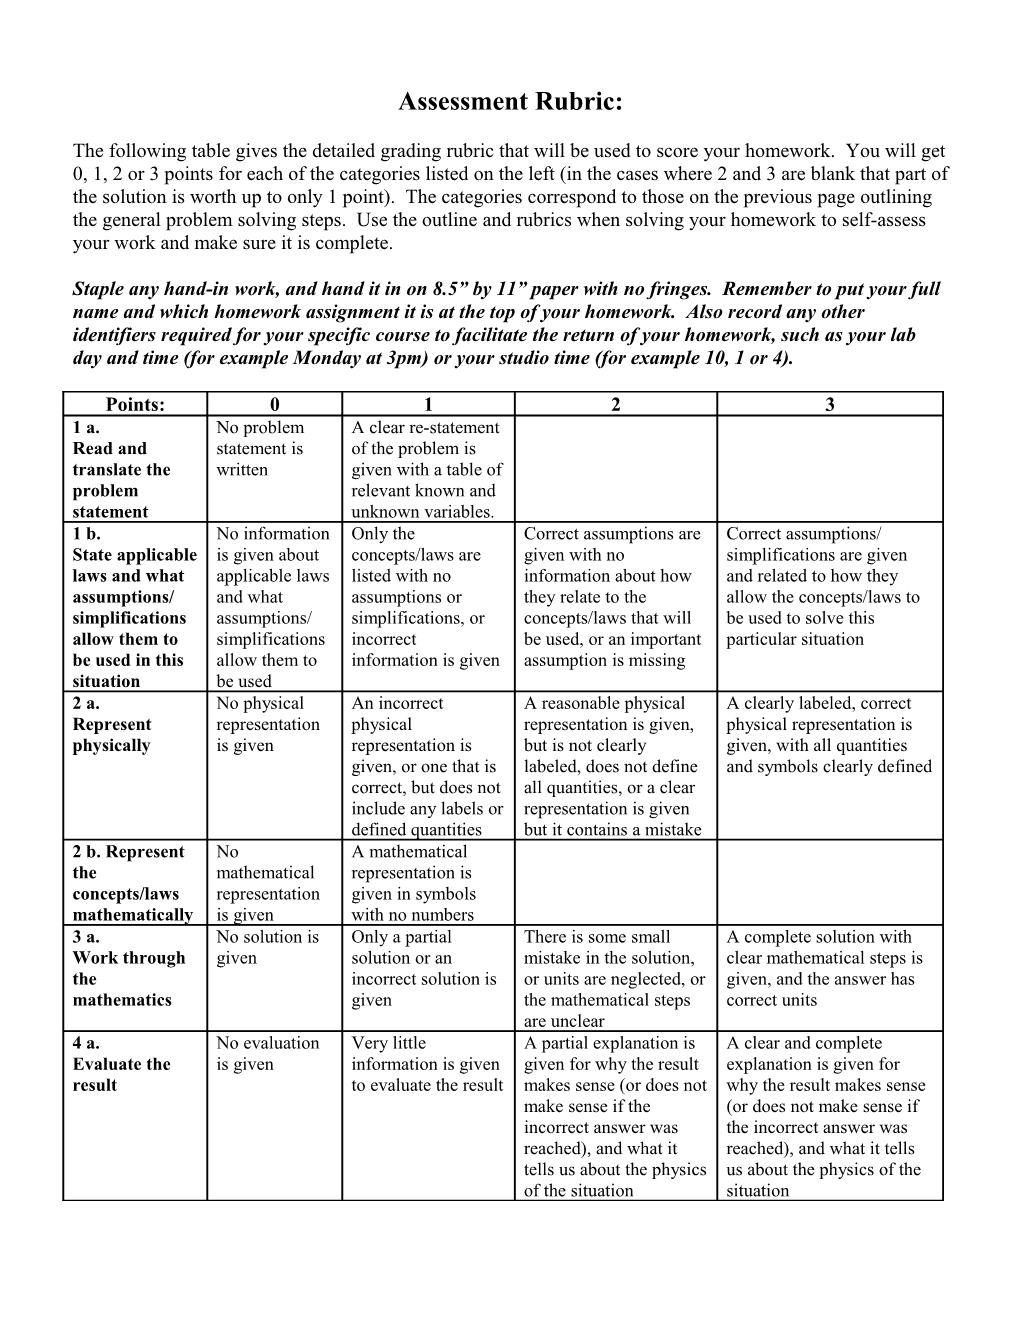 General Problem Solving Steps and Assessment Rubric